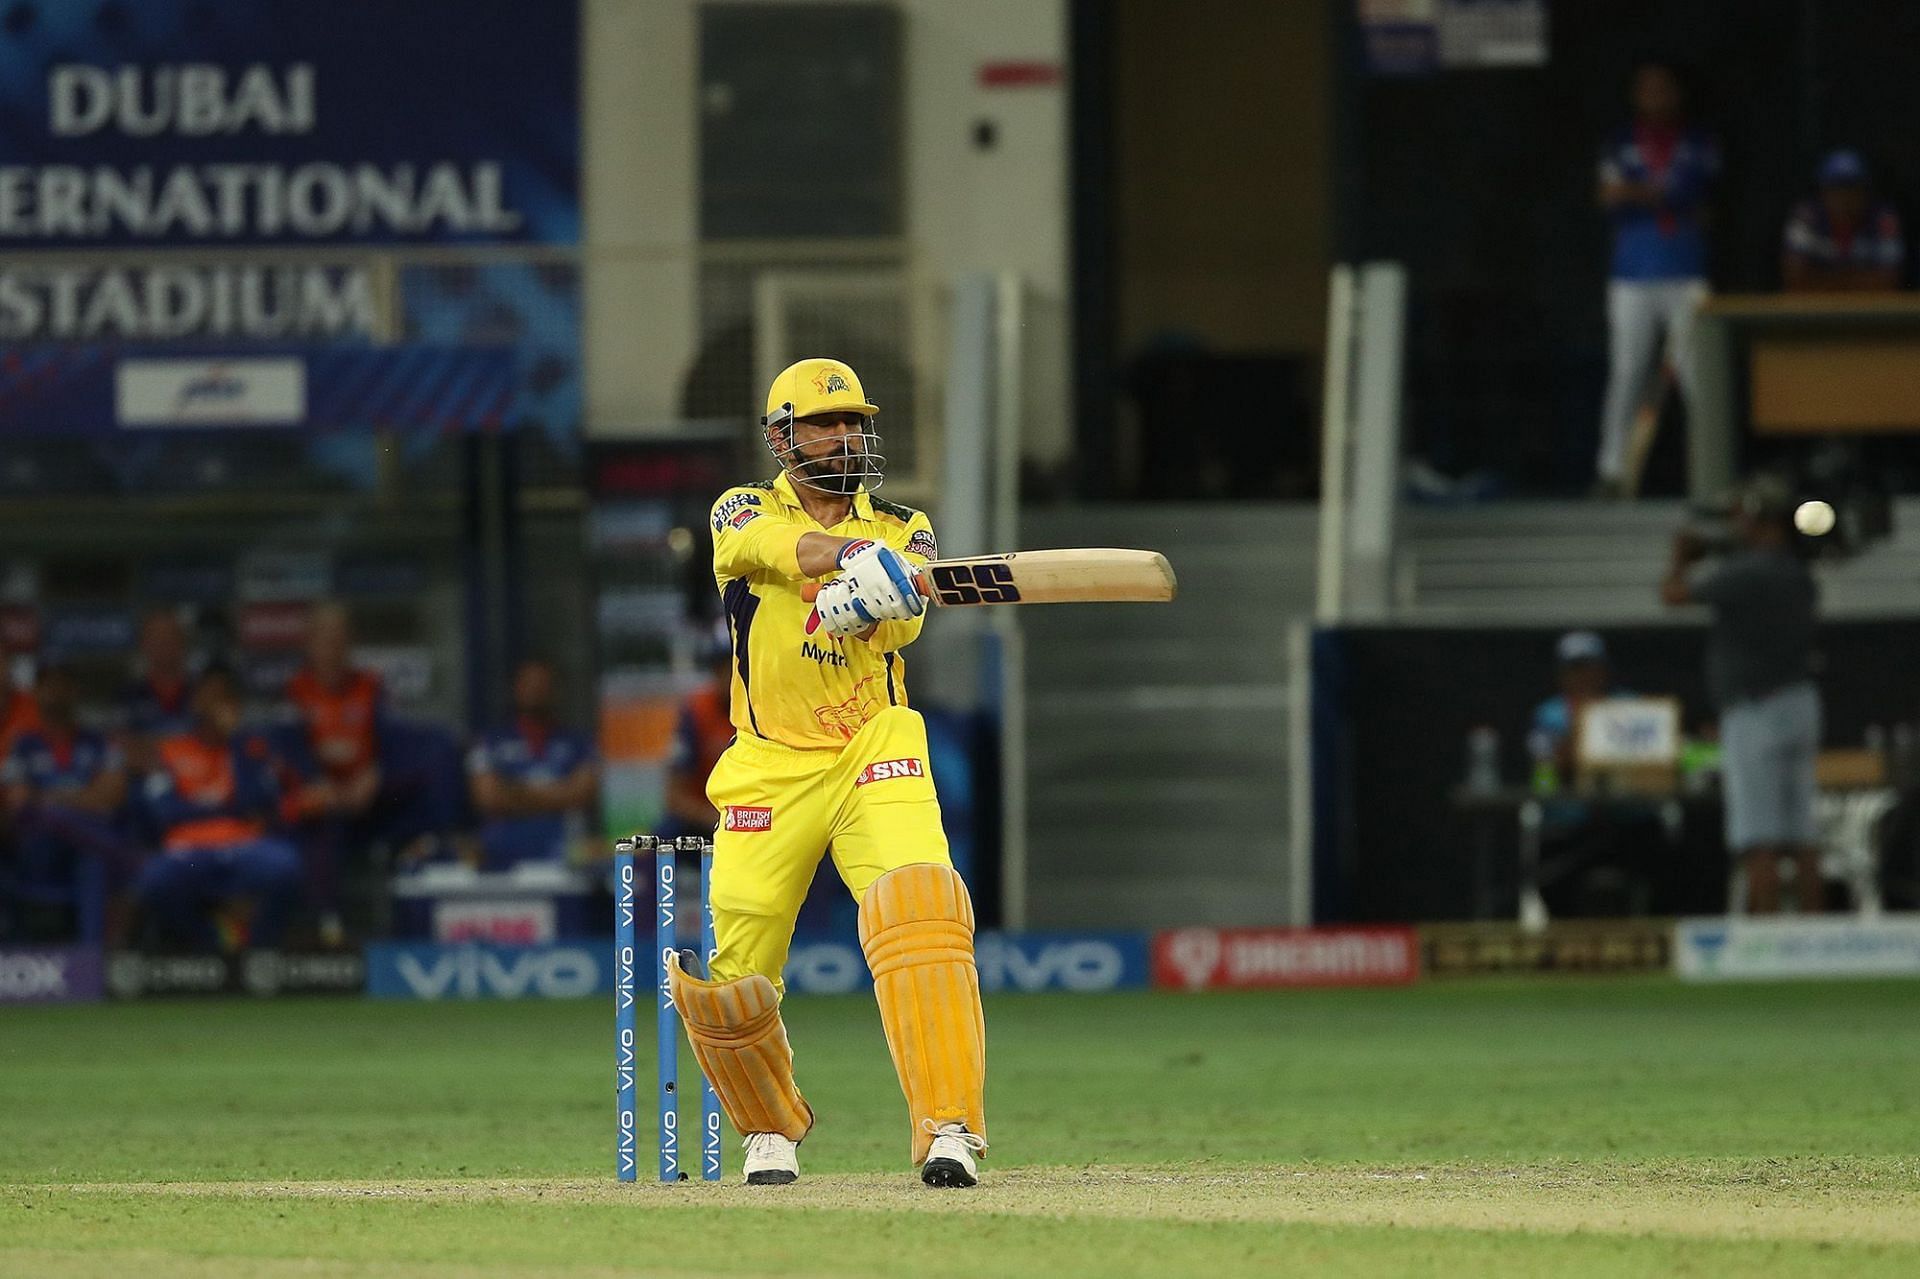 MS Dhoni played a match-winning cameo for CSK in Qualifier 1 [P/C: iplt20.com]